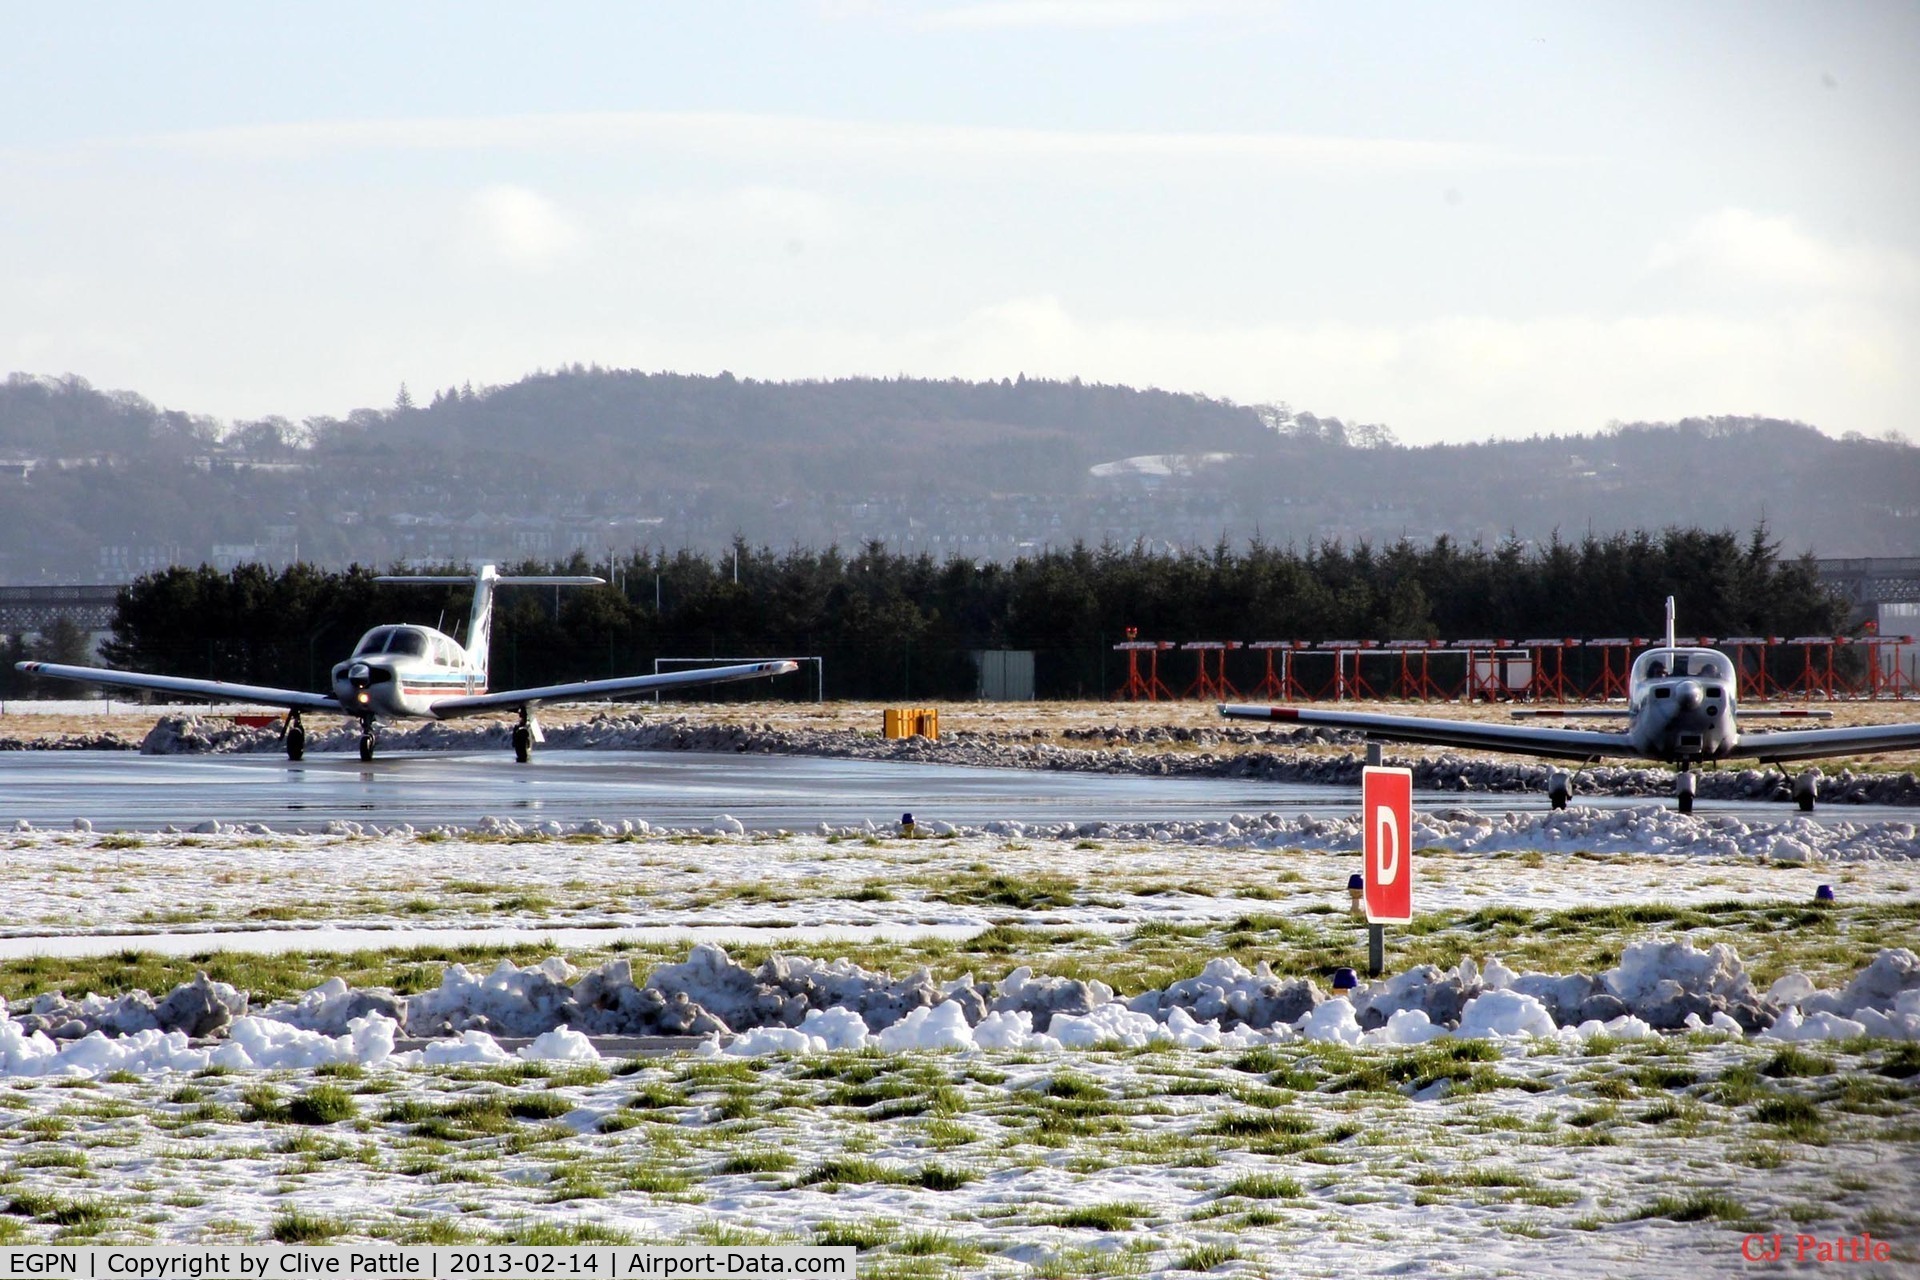 Dundee Airport, Dundee, Scotland United Kingdom (EGPN) - A snowy Dundee airport scene on Valentines Day 2013